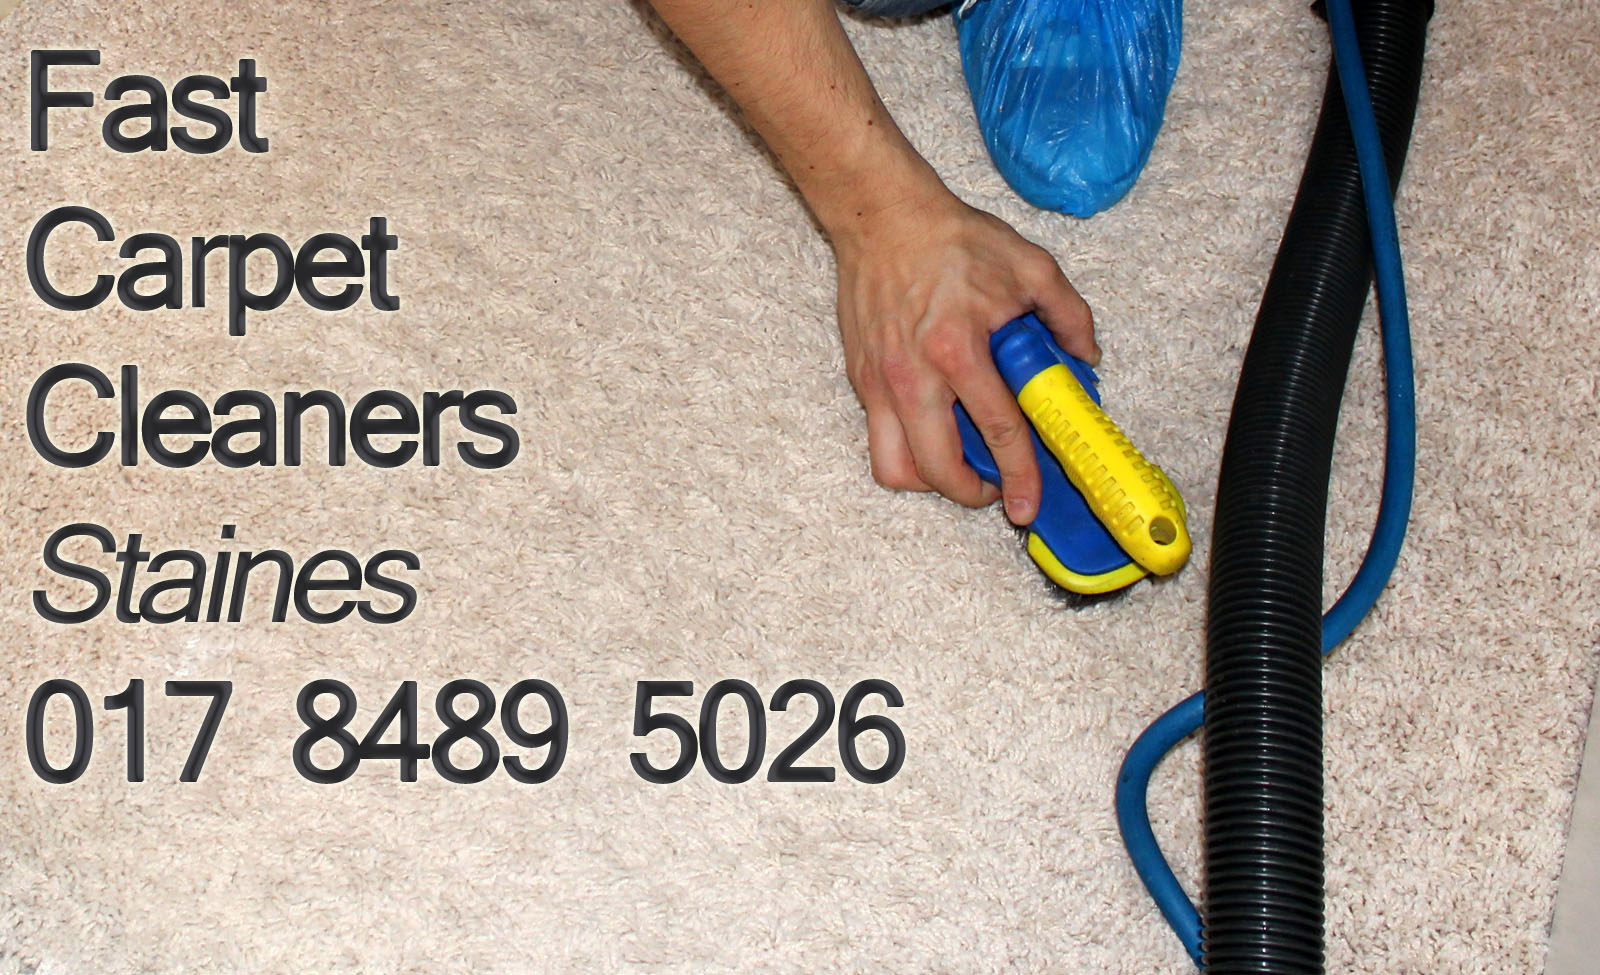 Carpet-Cleaning-Cleaners-Staines